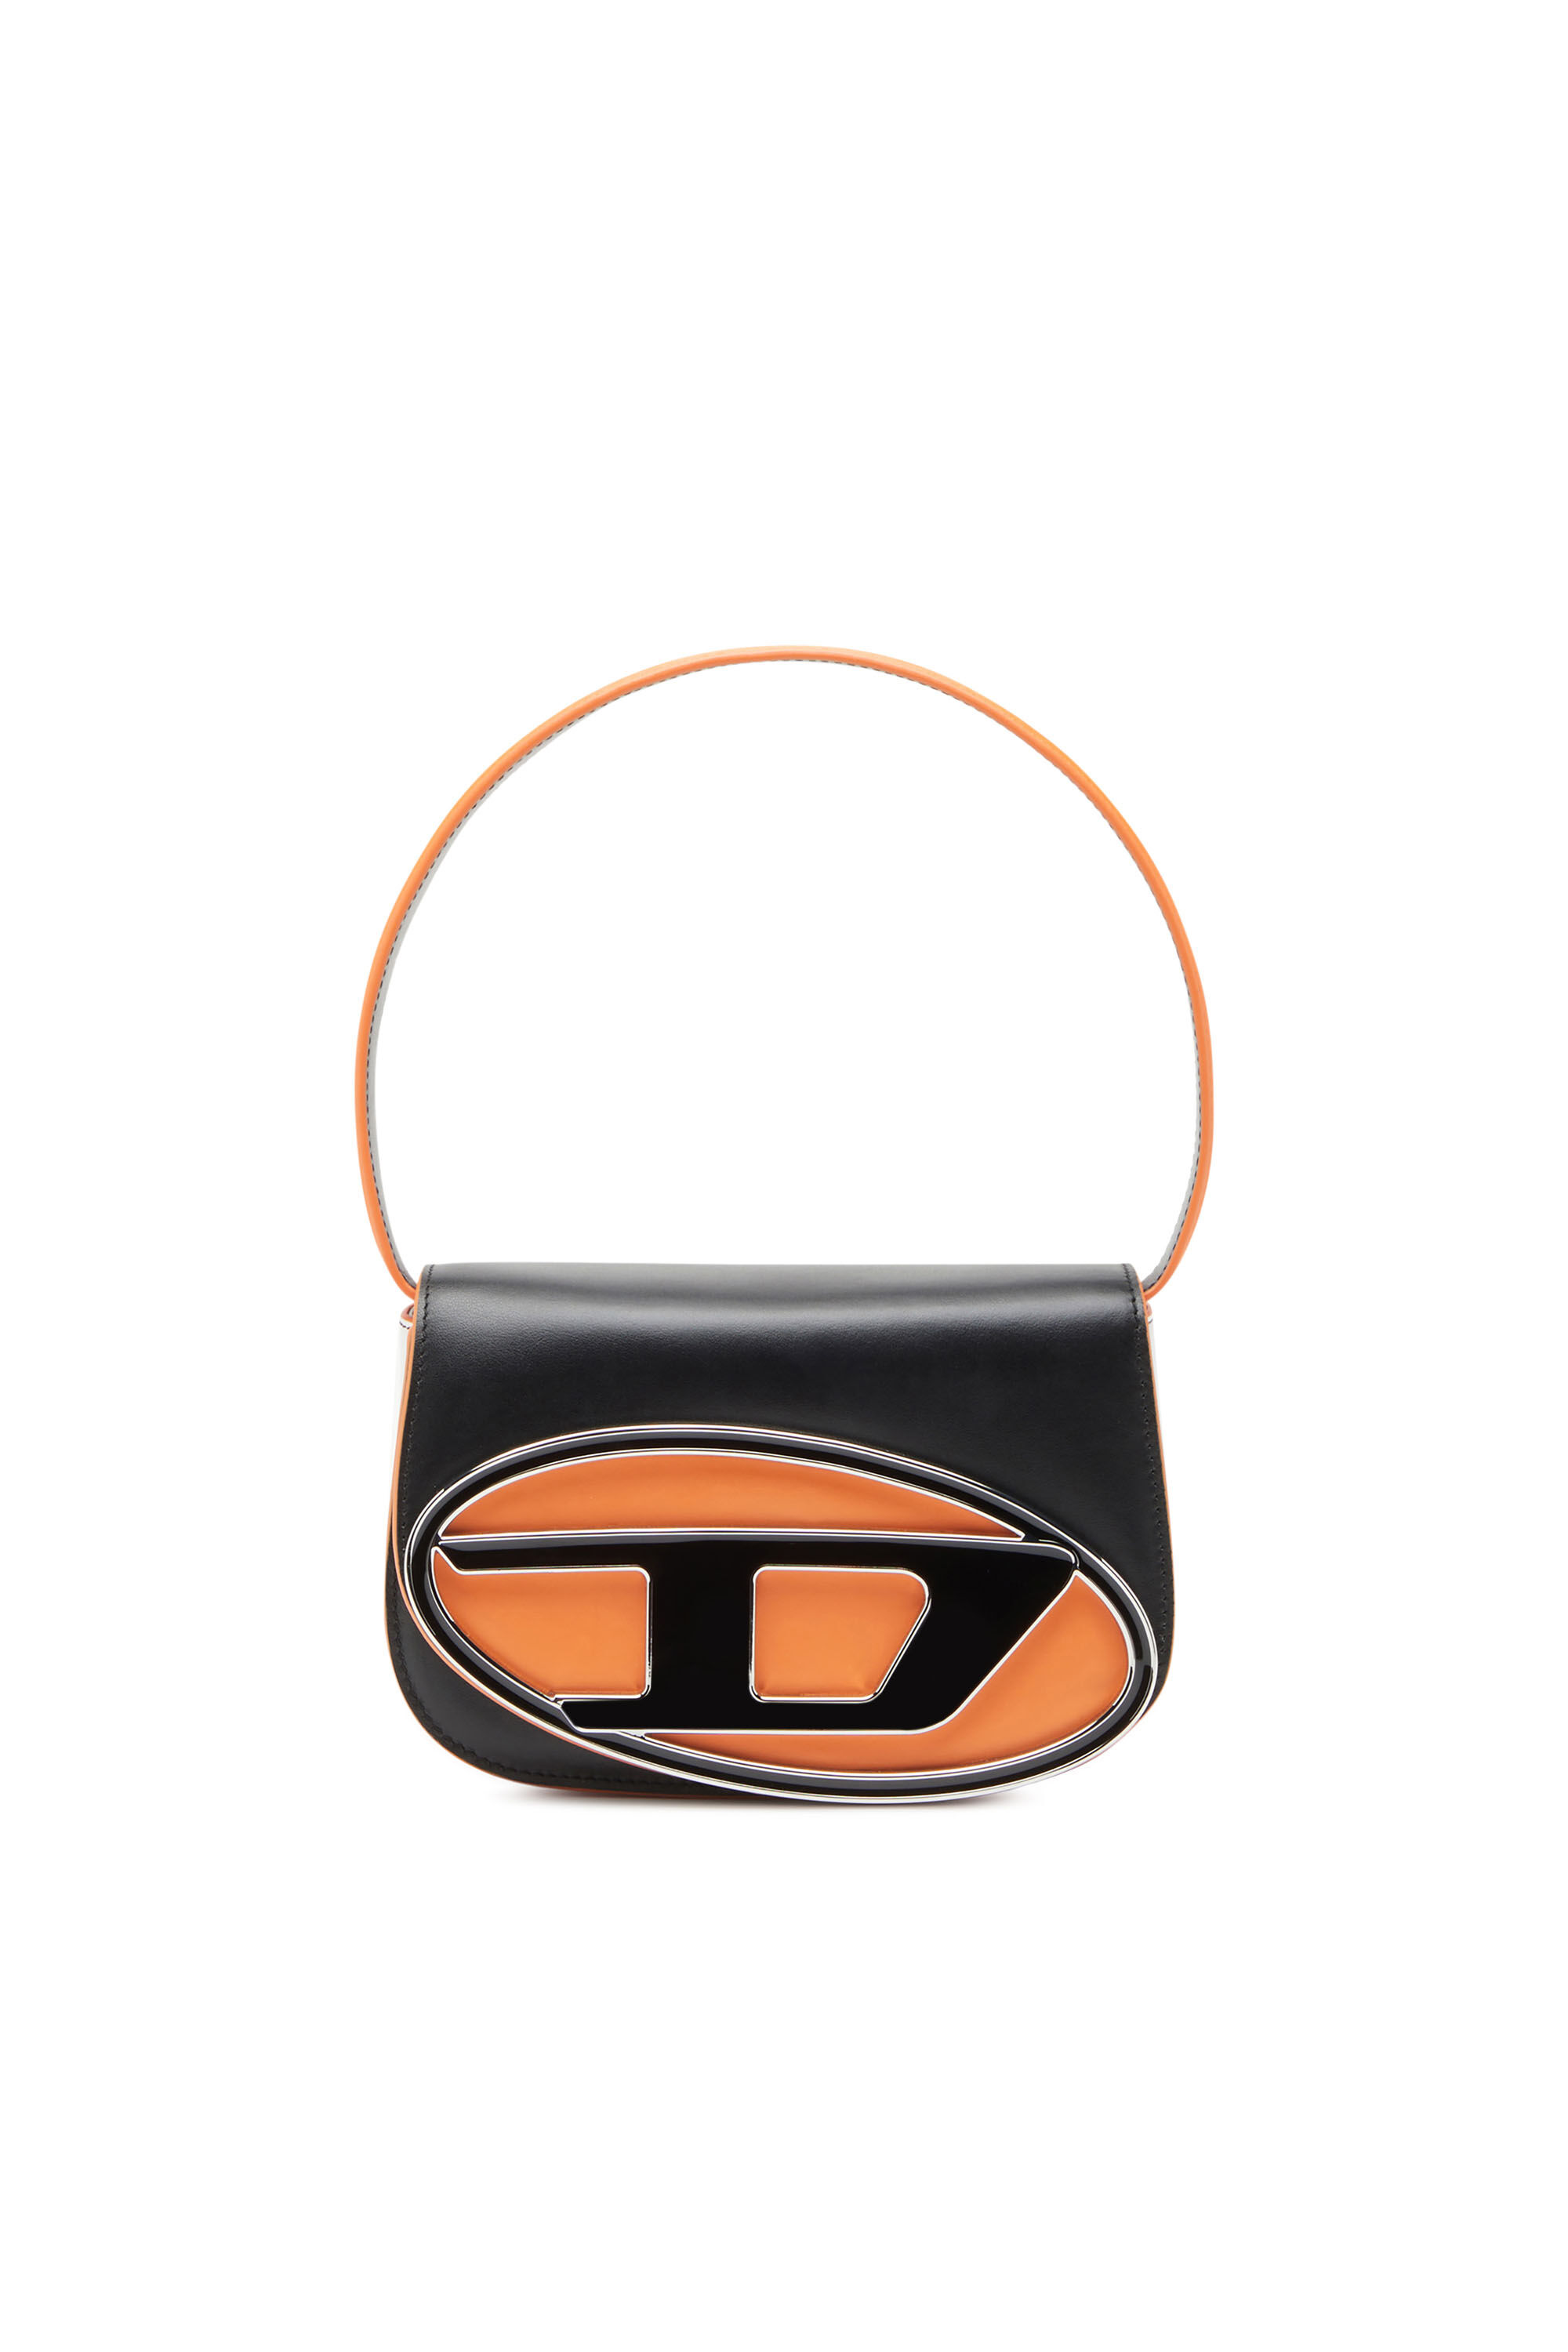 1DR Woman: Small shoulder bag in nappa leather | Diesel